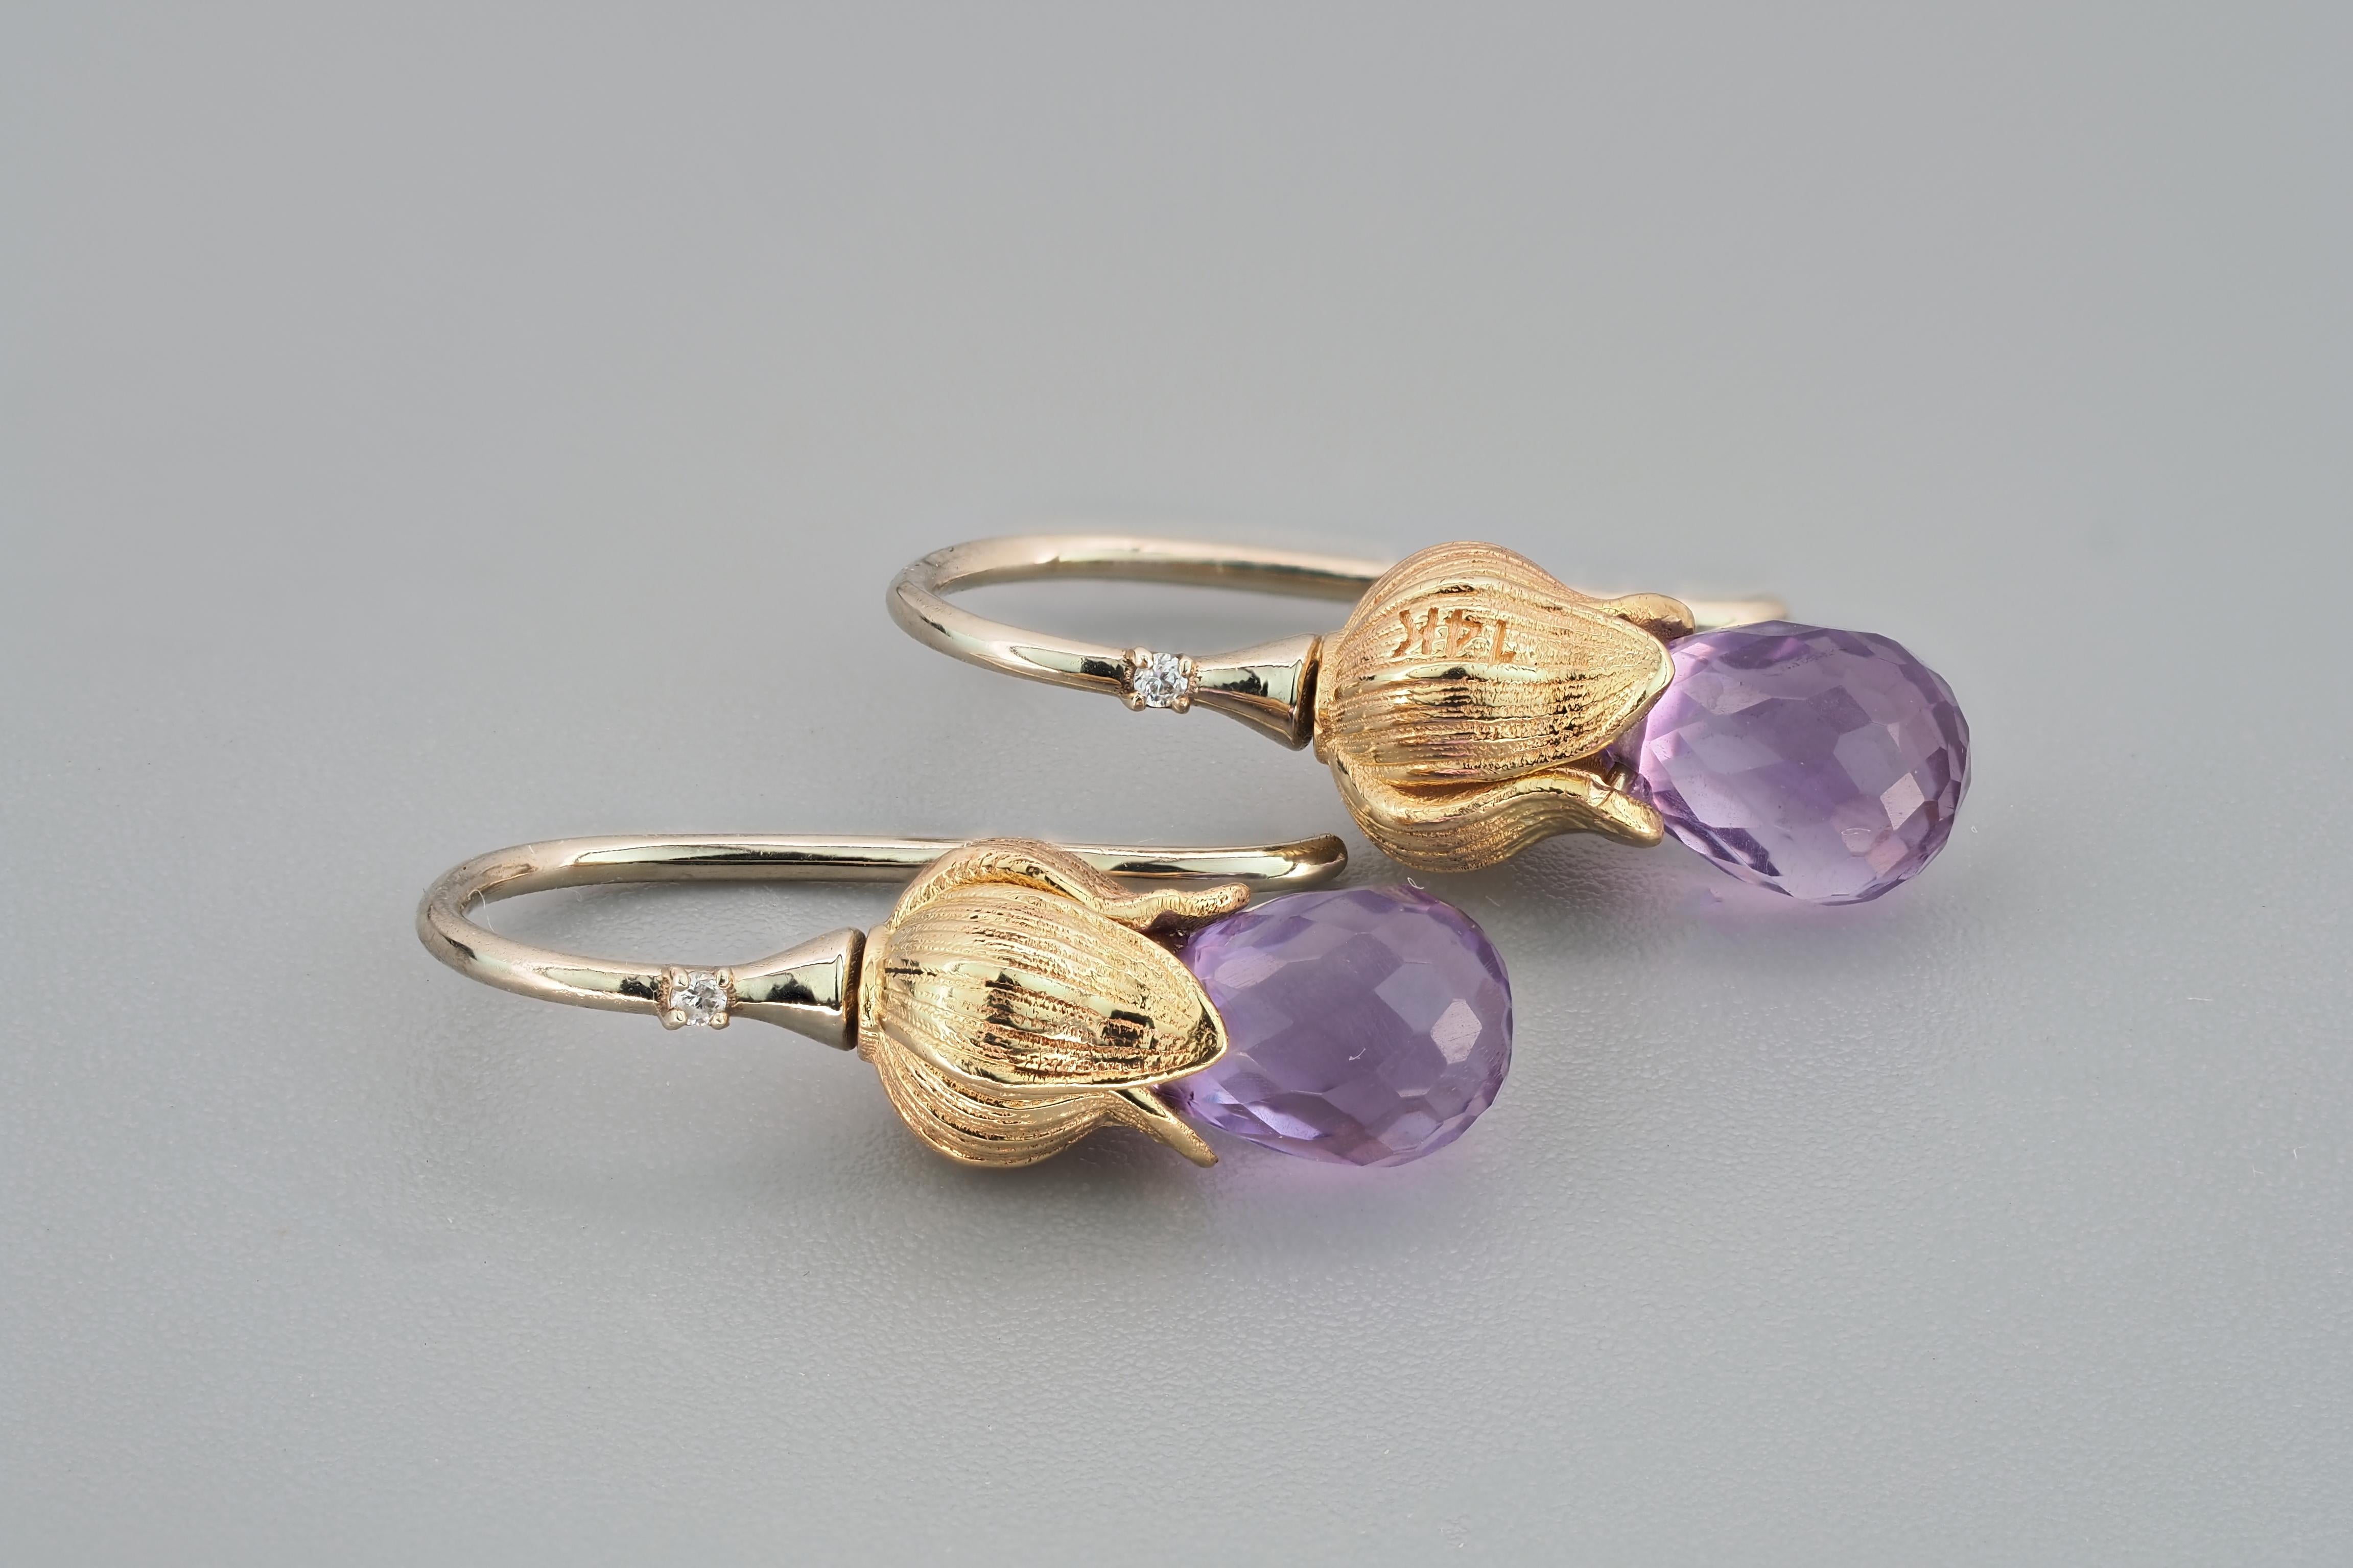 Women's Flower Design Earrings with Amethysts and Diamonds For Sale